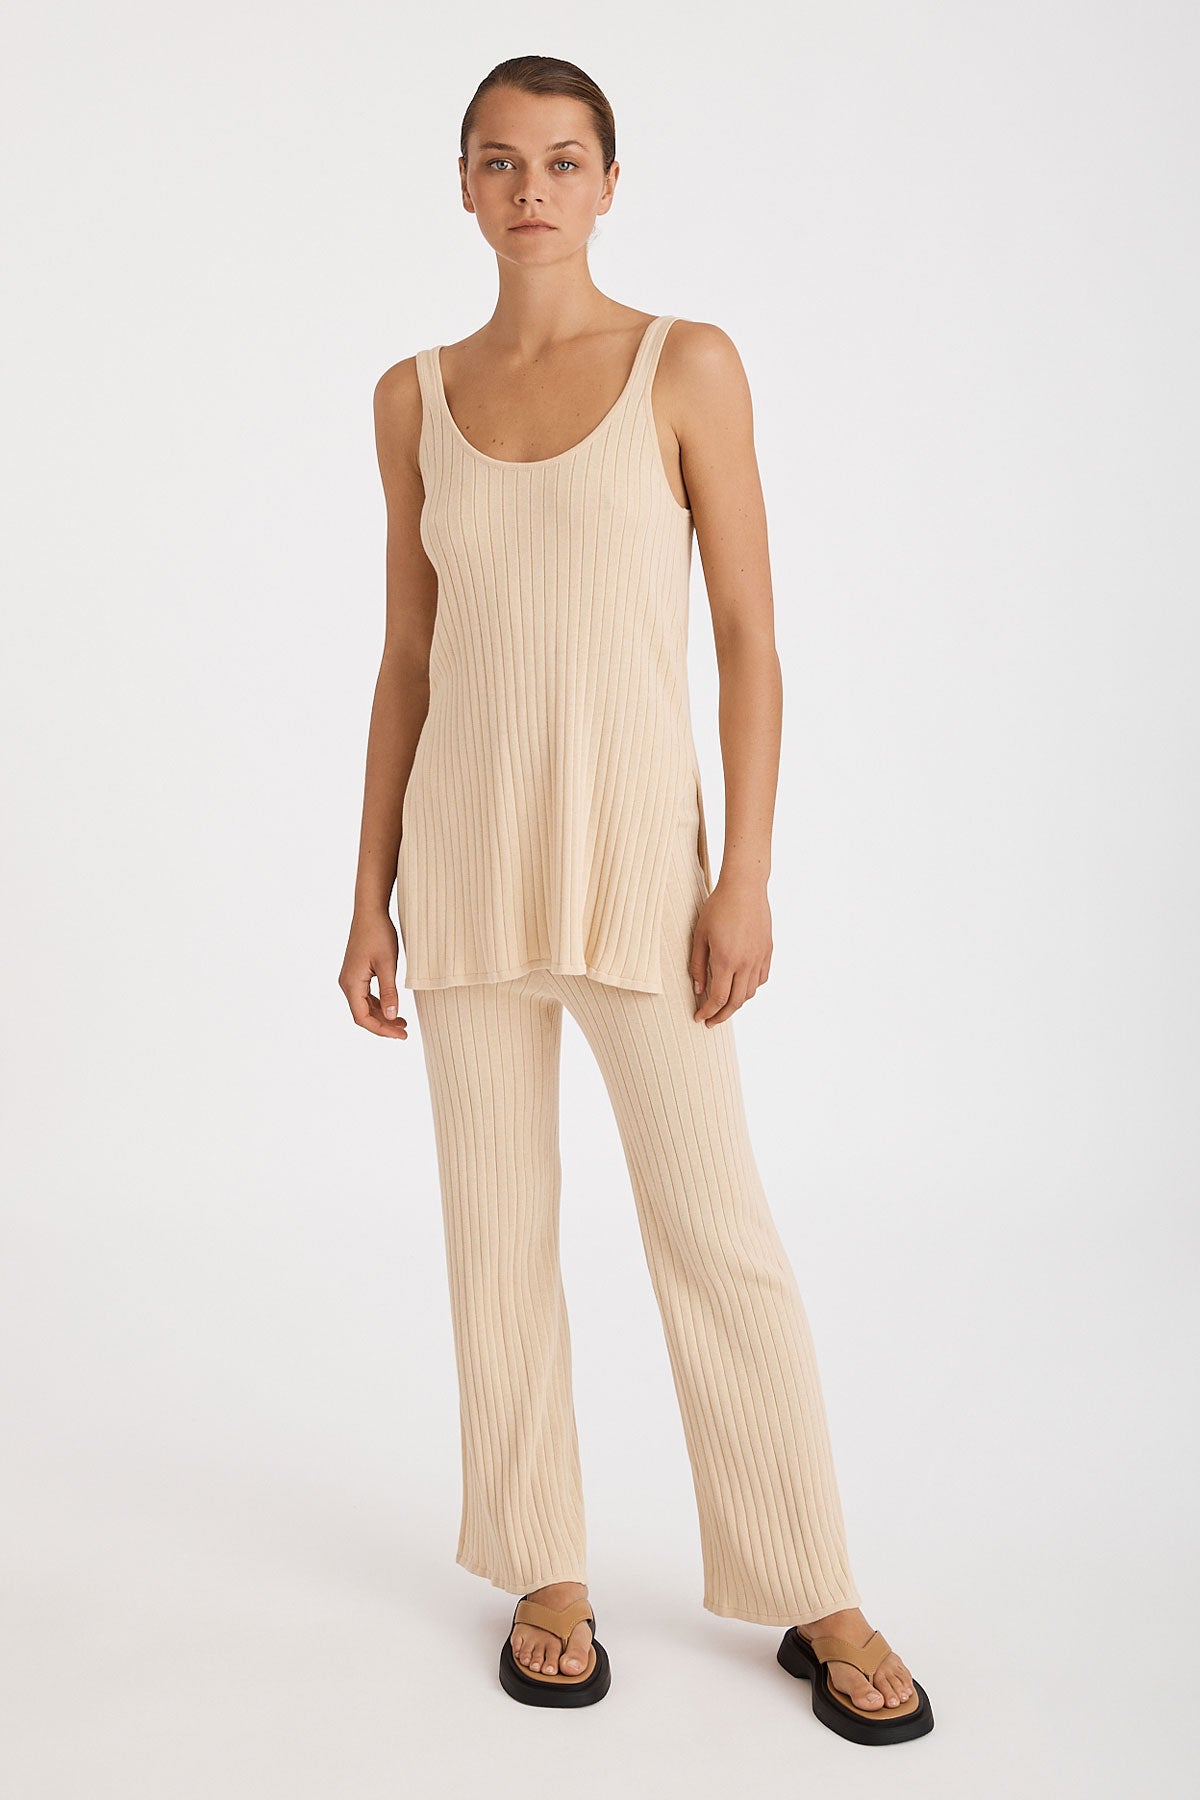 Zulu & Zephyr Knitted Cotton Rib Pant